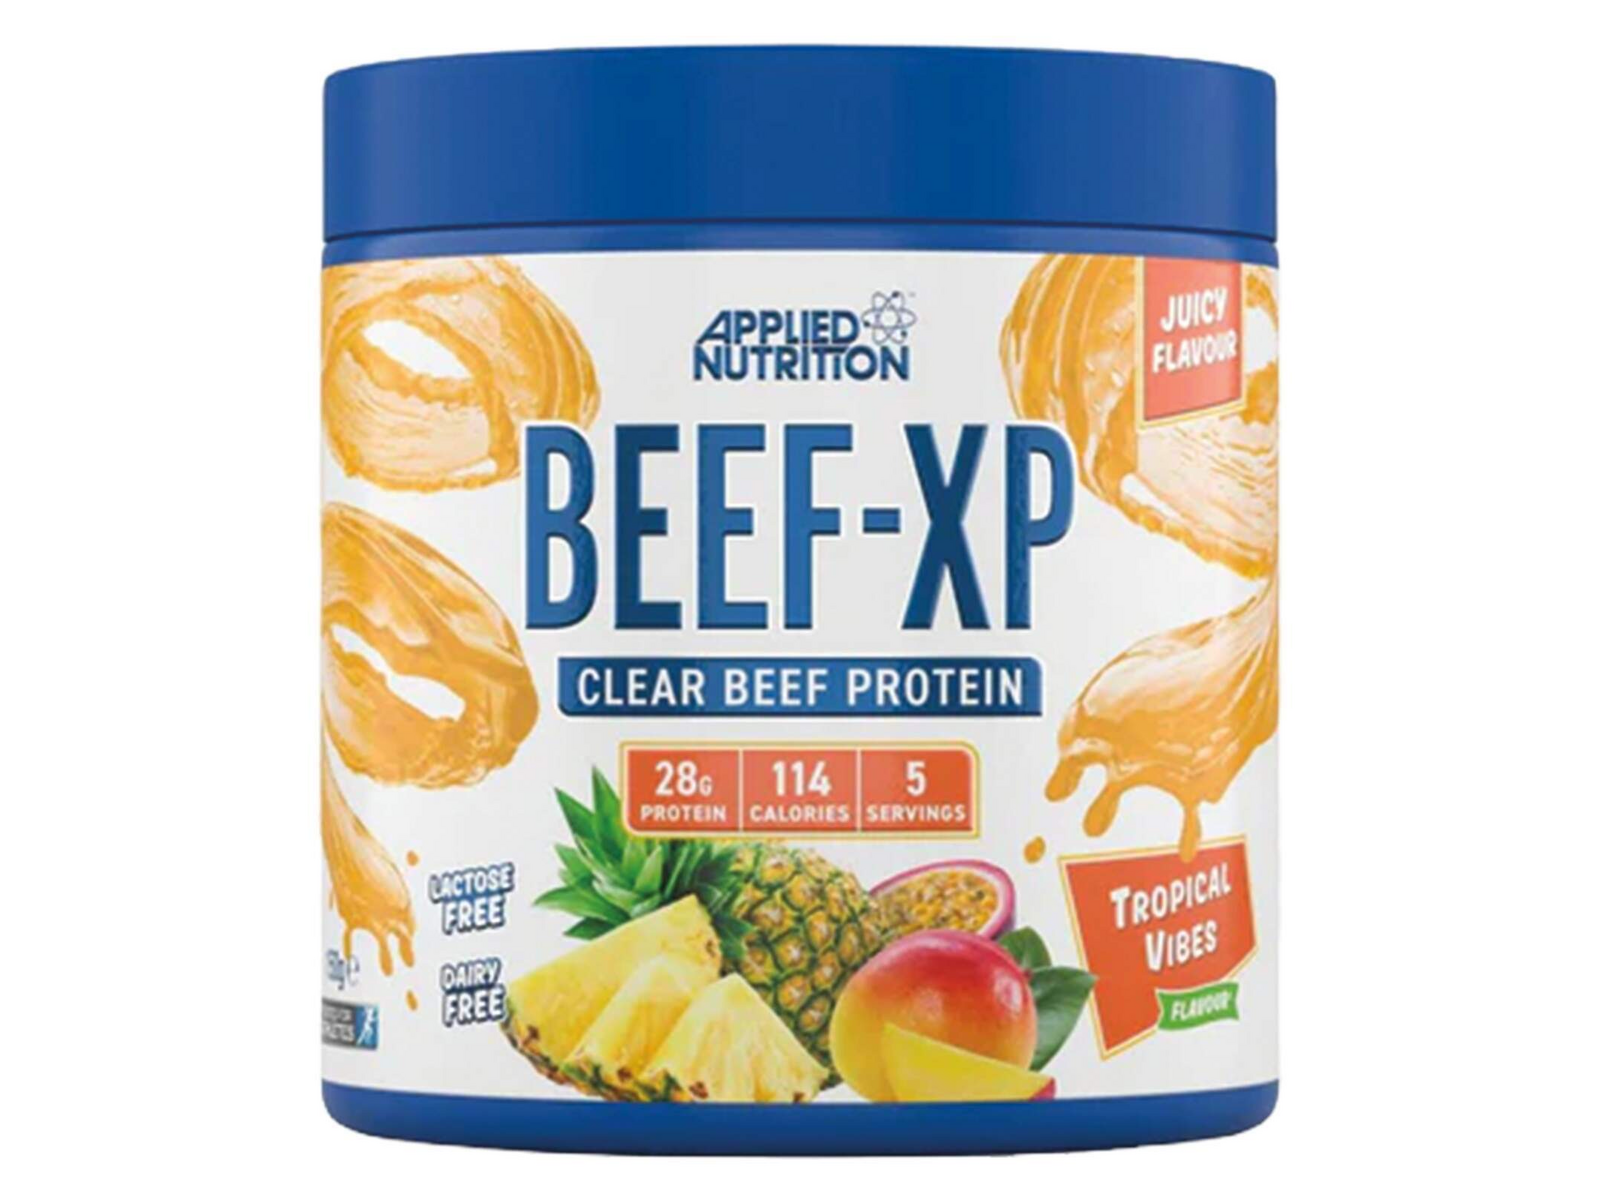 Beef-XP (Tropical Vibes - 150 gram) - APPLIED NUTRITION